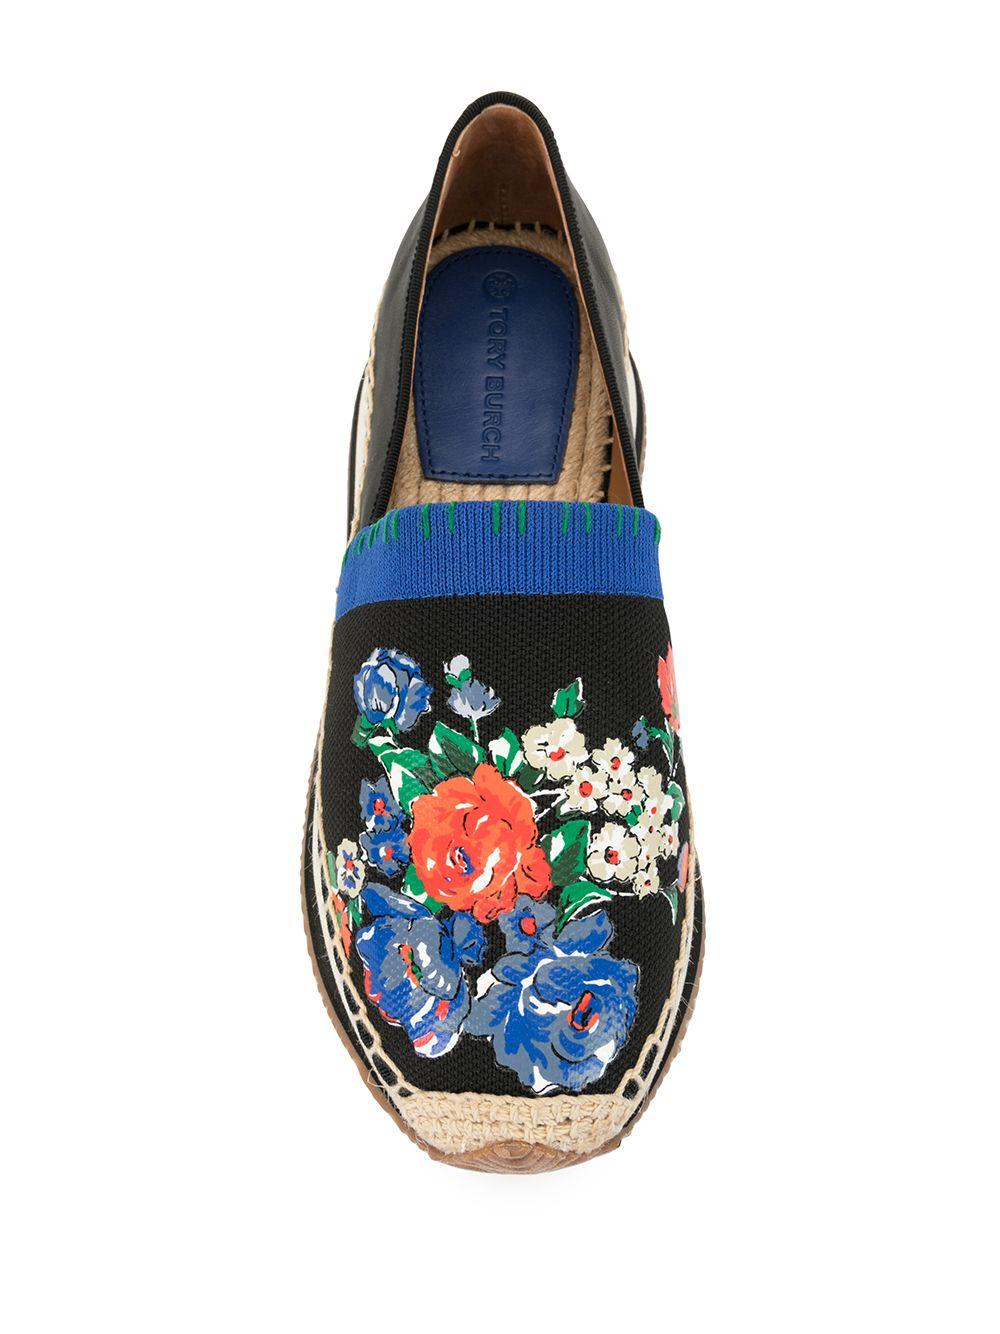 Som duft rent Tory Burch Daisy Floral Espadrilles in Black (Blue) - Lyst